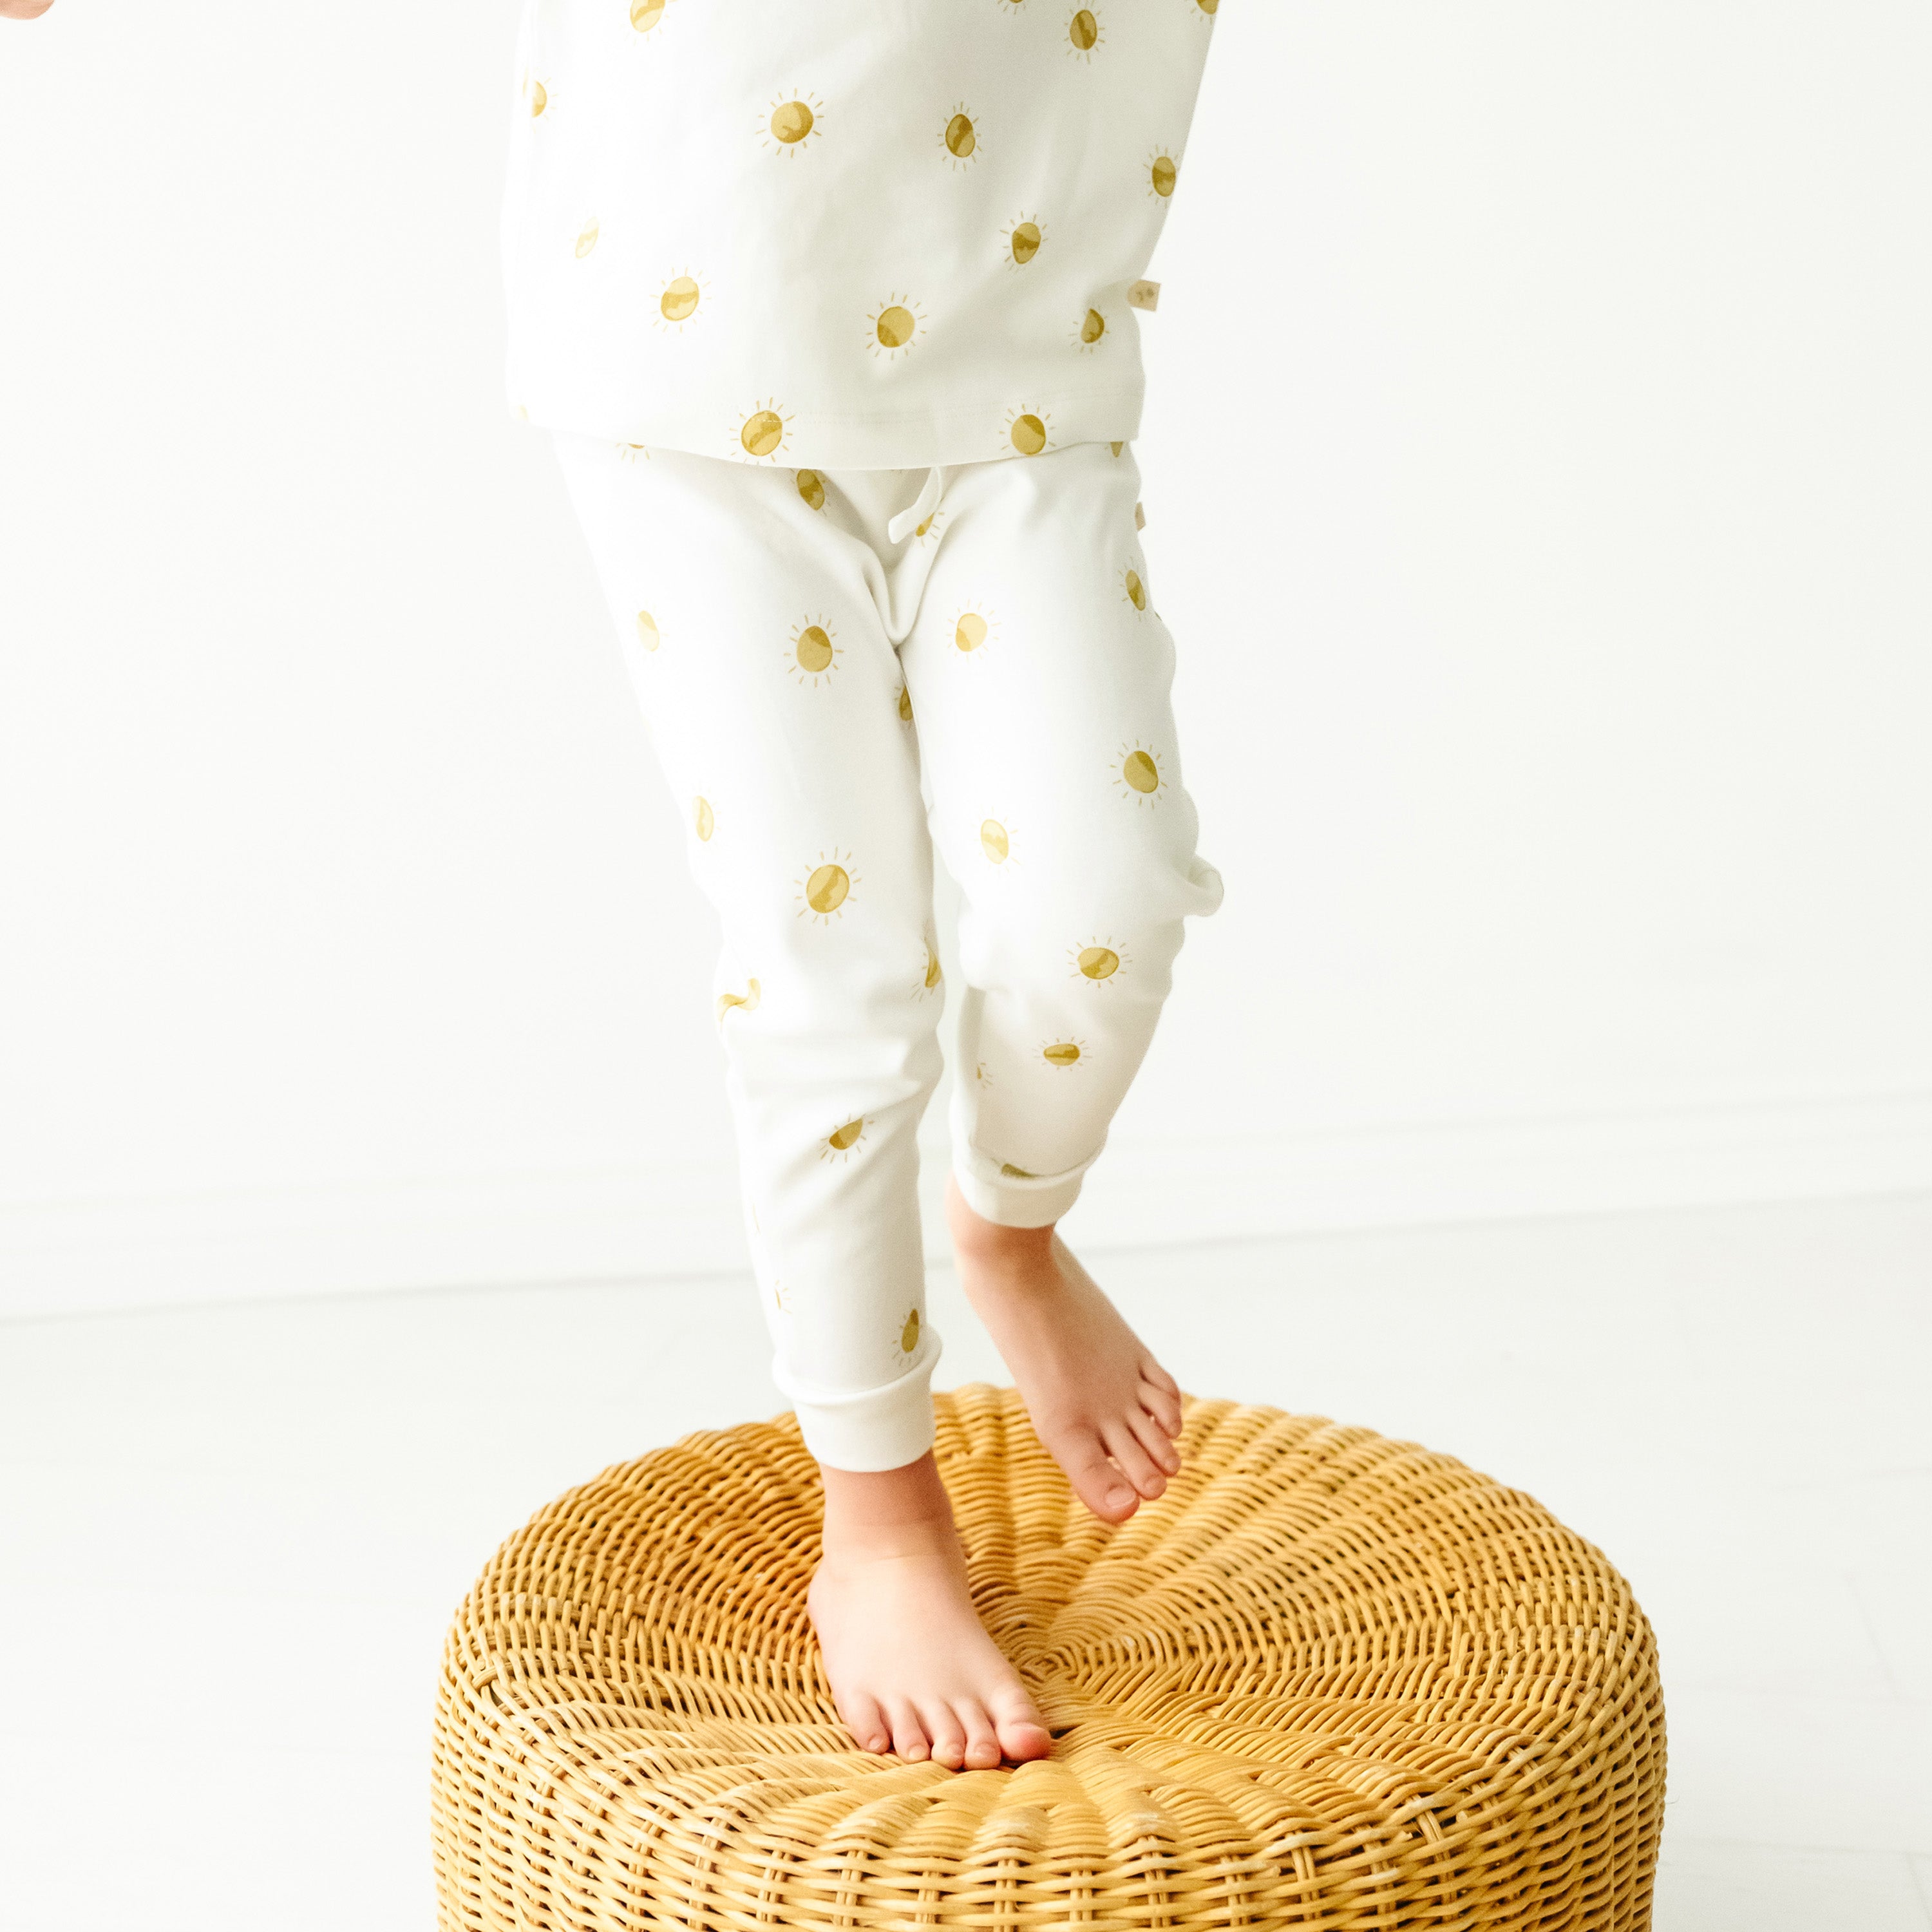 A baby in white pajamas with yellow sun prints stands on a wicker stool against a plain white background, only the lower half of their body visible wearing Organic Harem Pants - Sunshine by Makemake Organics.